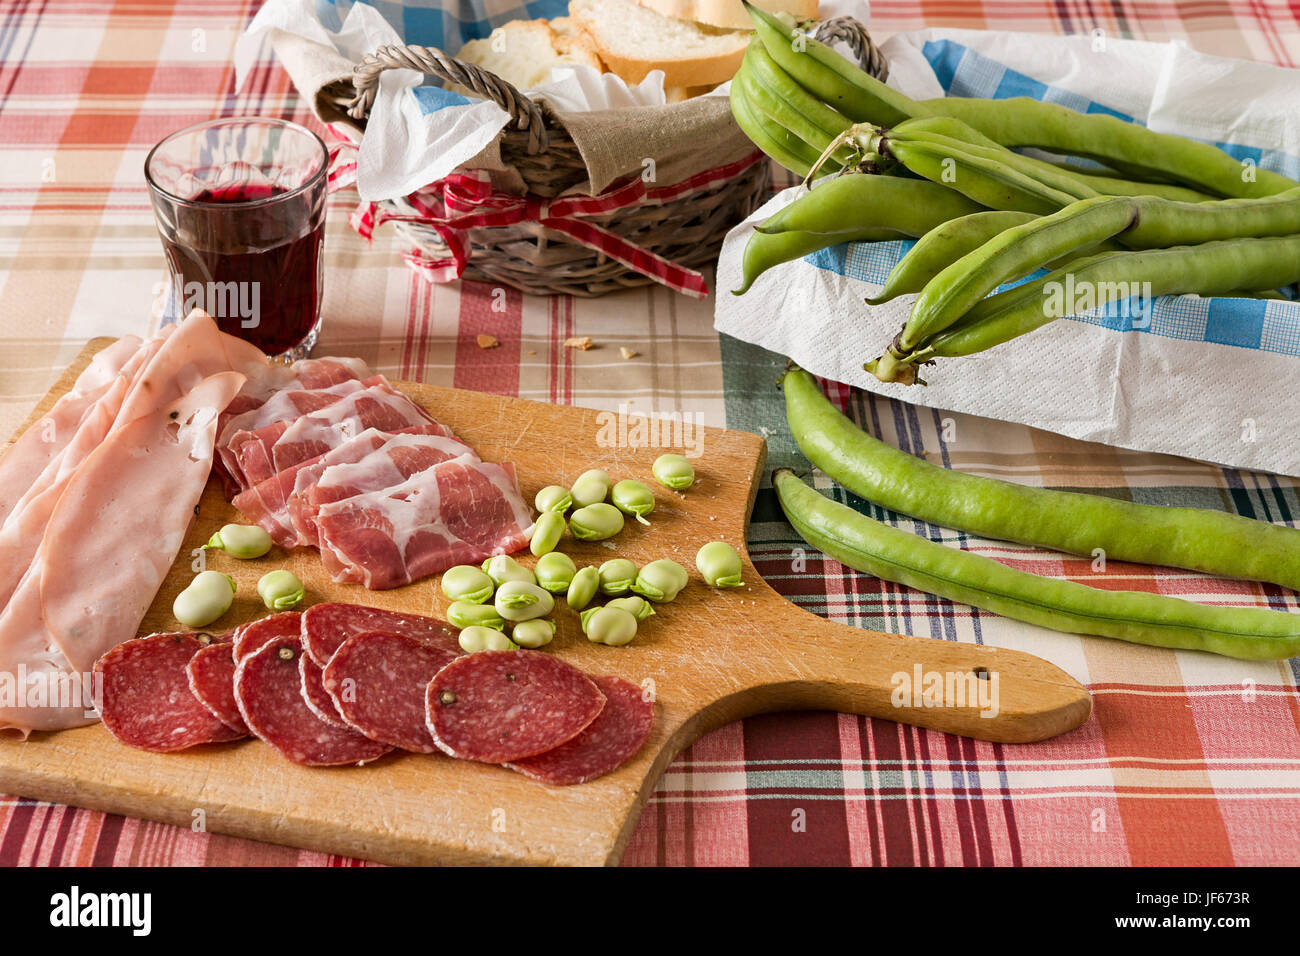 Cold meats broad bean and red wine Stock Photo